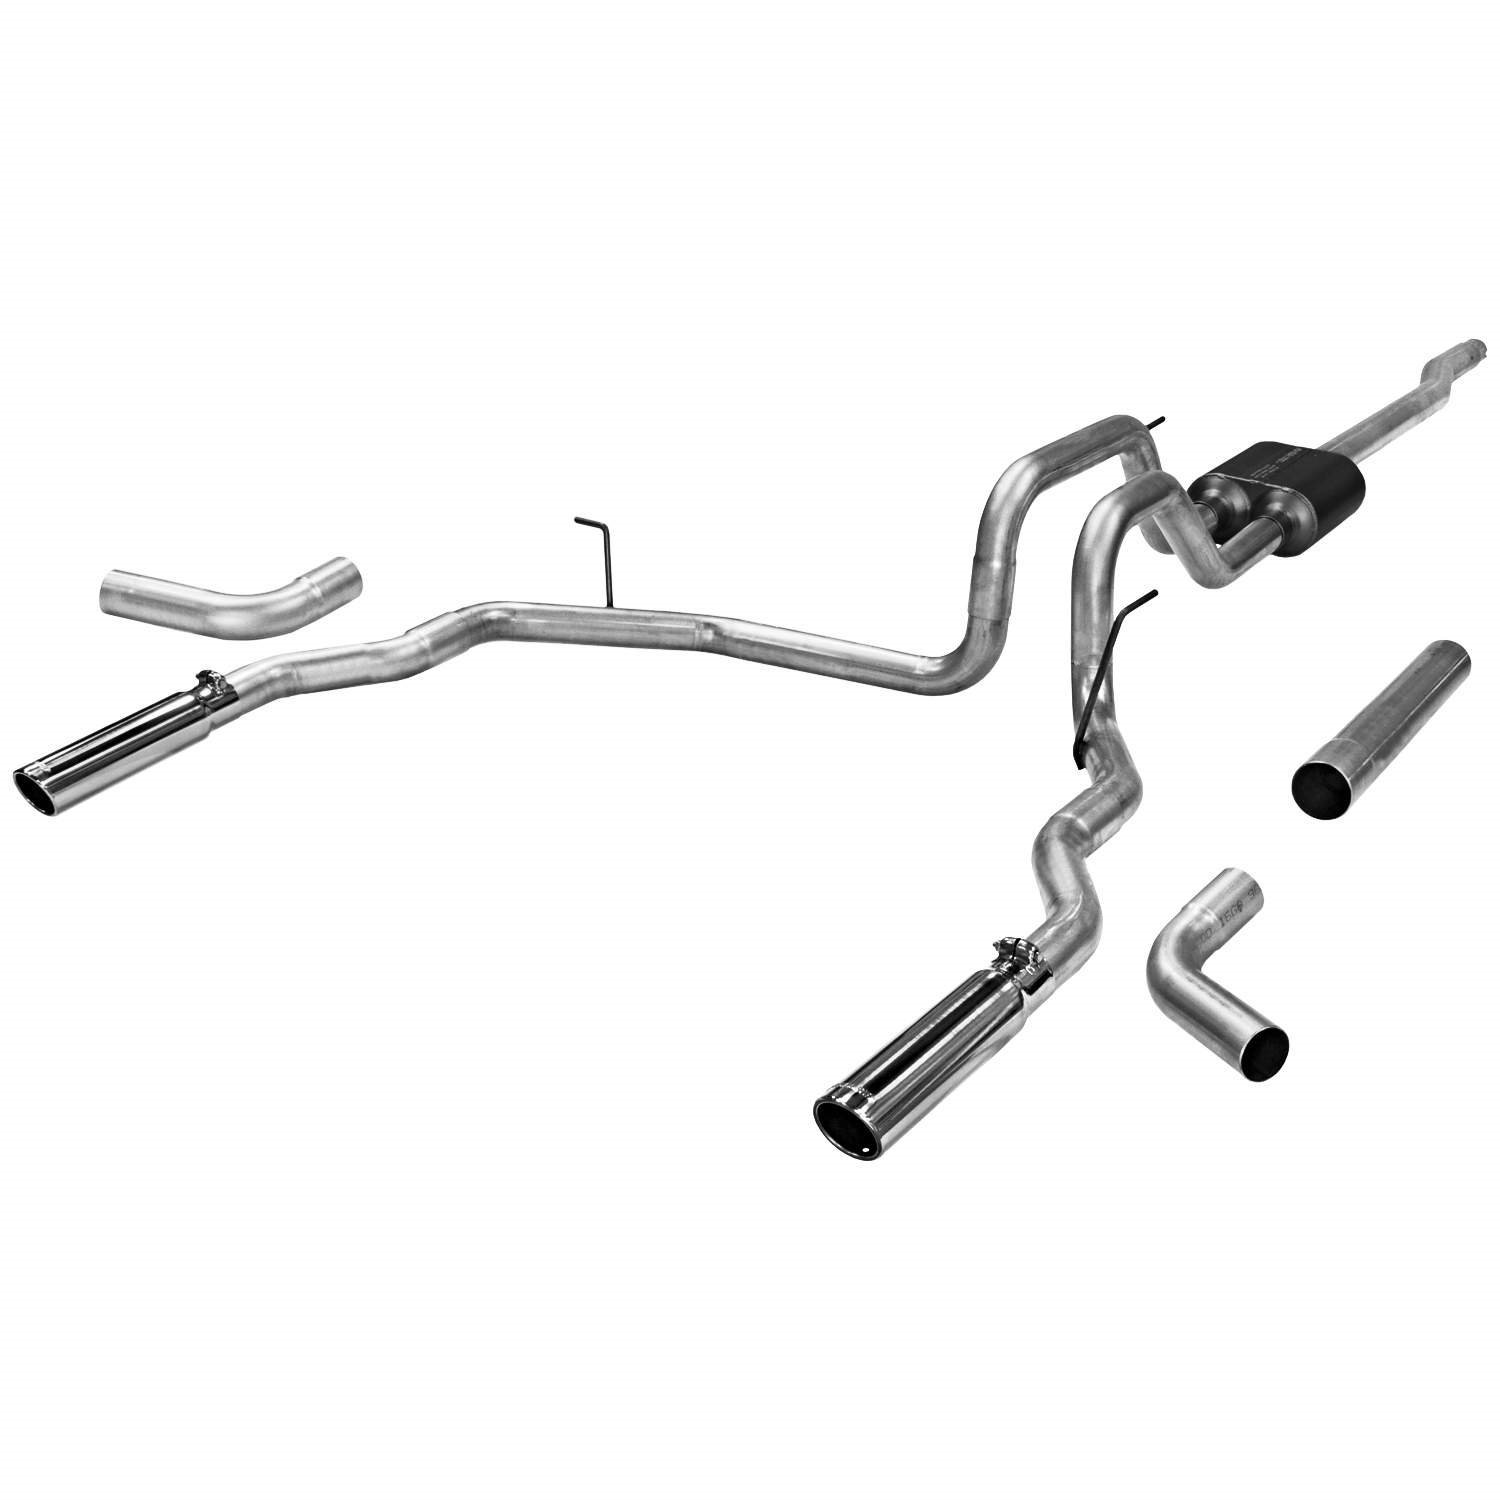 American Thunder Cat-Back Exhaust System 2004-2008 Ford F-150 4.6L/5.4L